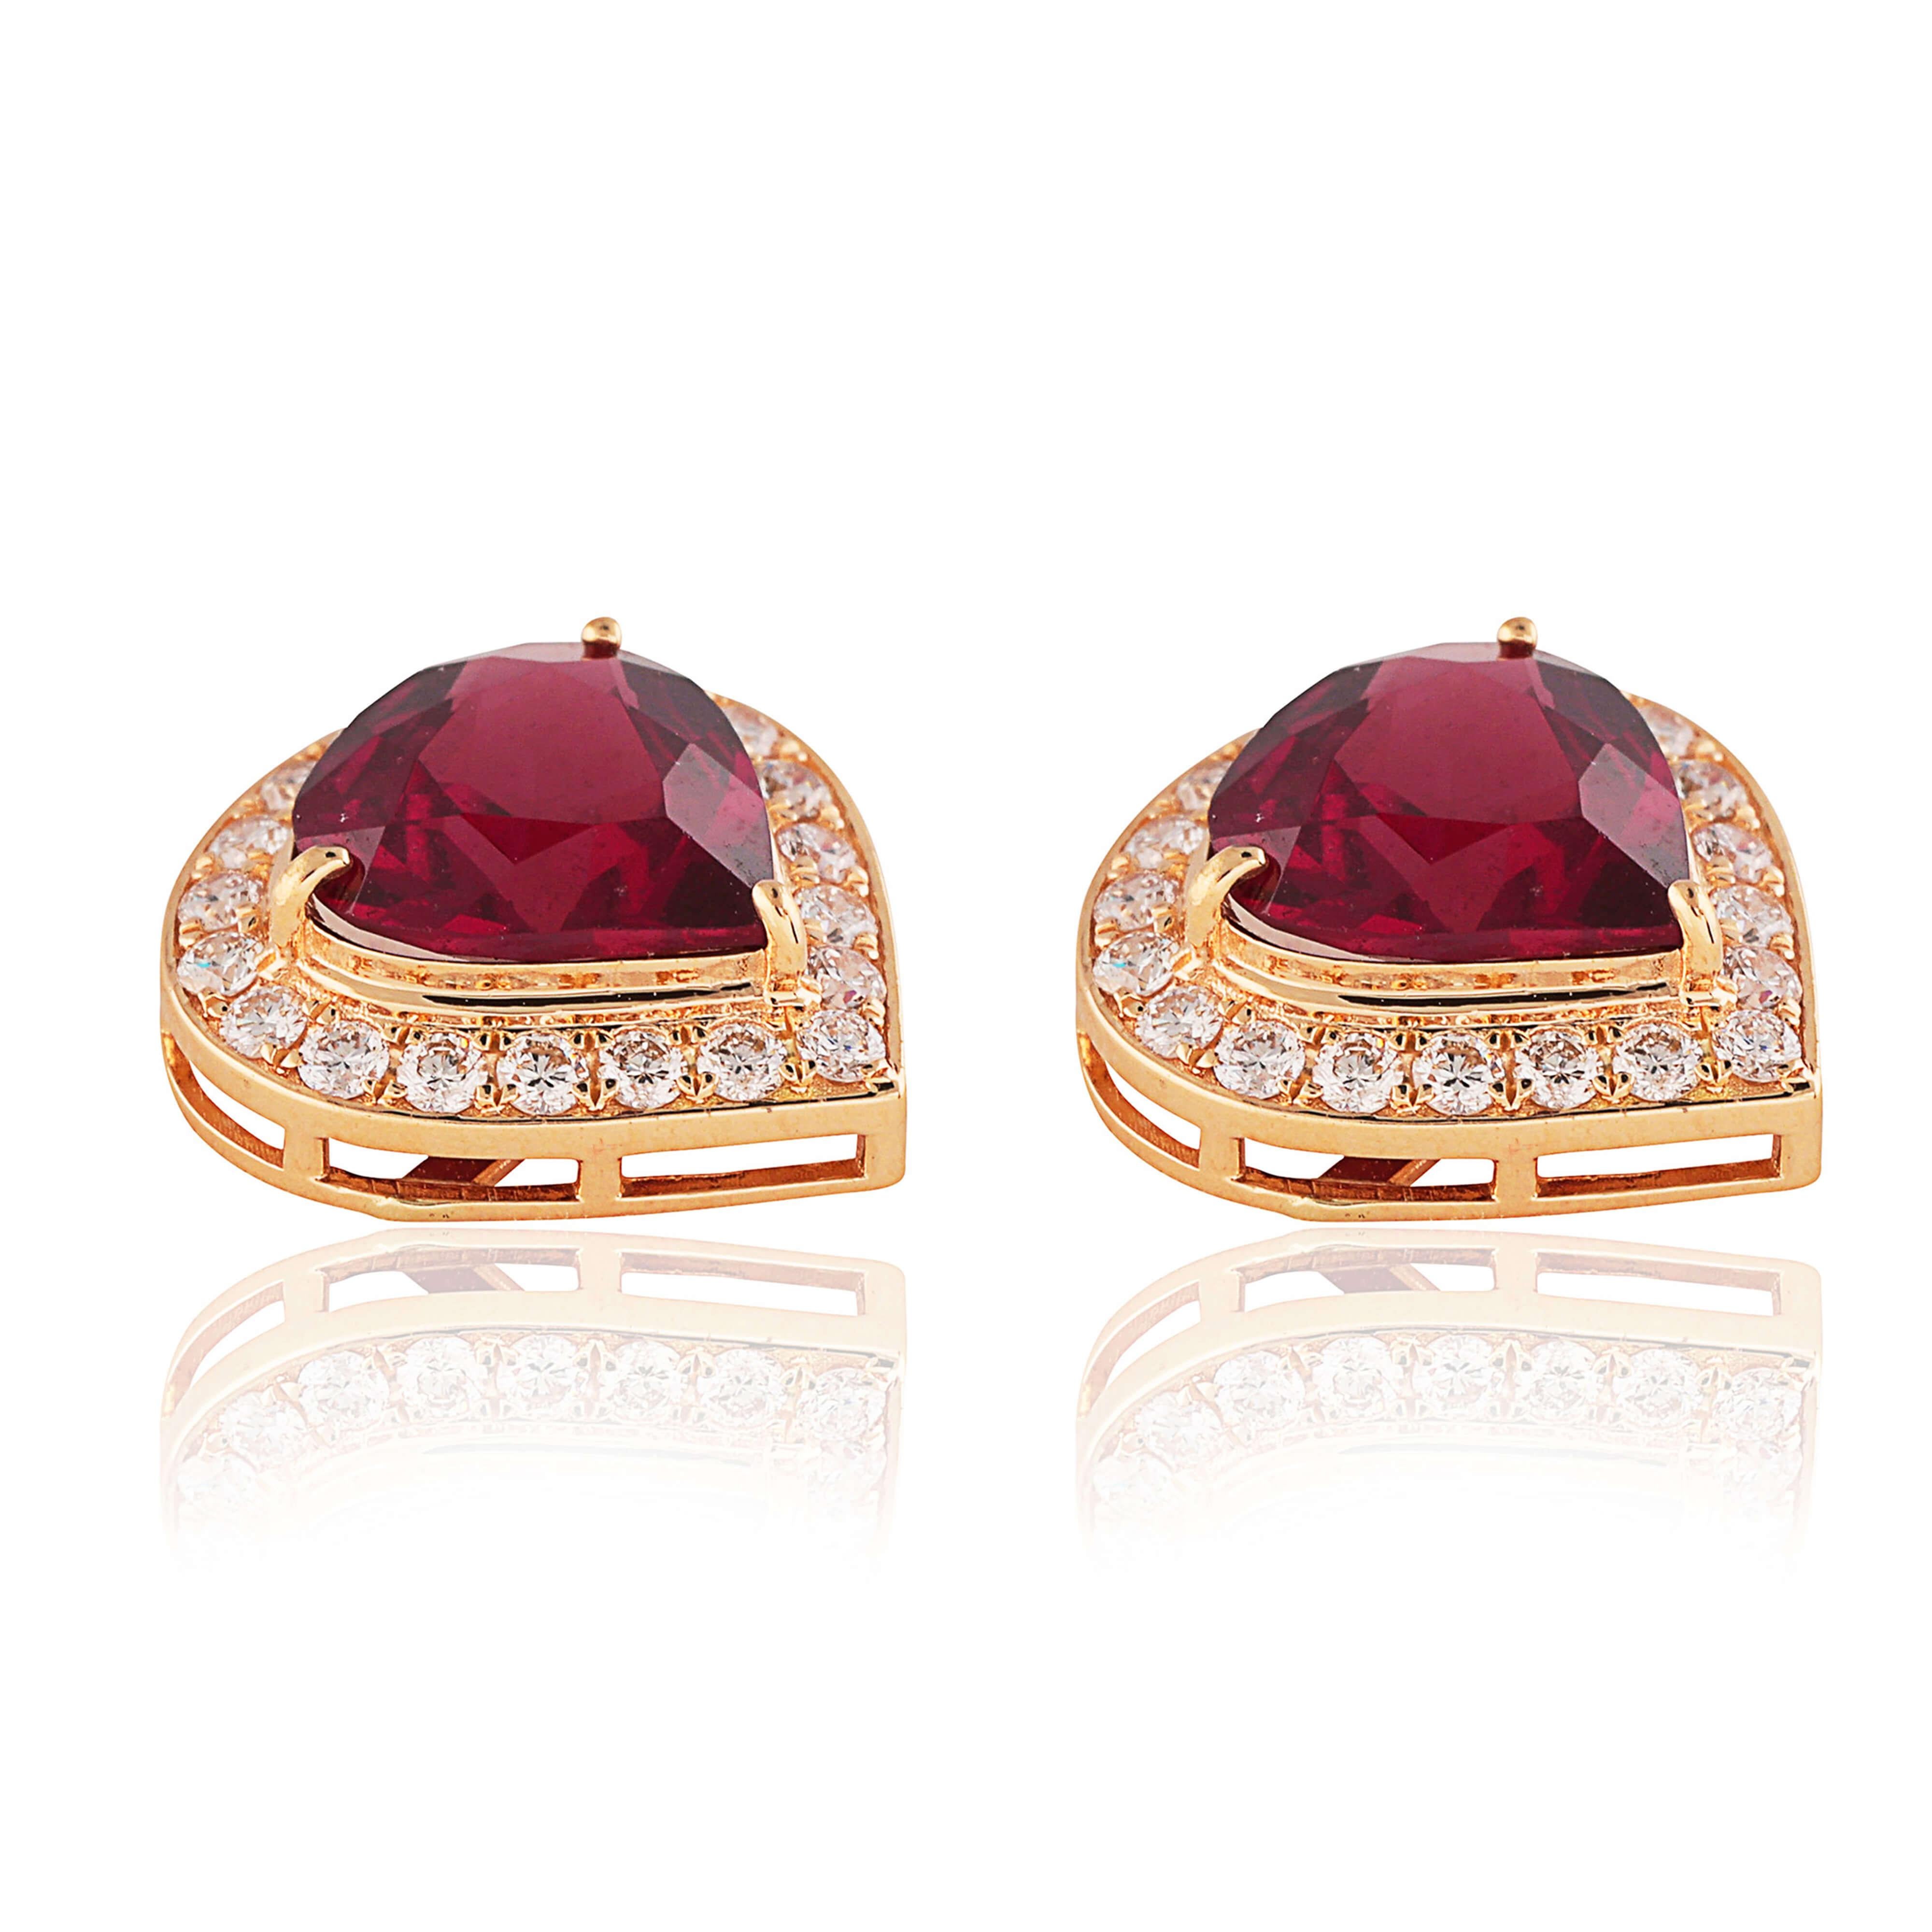 A forever piece of jewellery. A classic, an heirloom. A great (‘can’t go wrong) gift!

Set on 18kt gold with consciously sourced round cut brilliant diamonds and high garnets.

3.852 grams 18kt gold; 0.62 carat round brilliant cut diamonds; 5.12